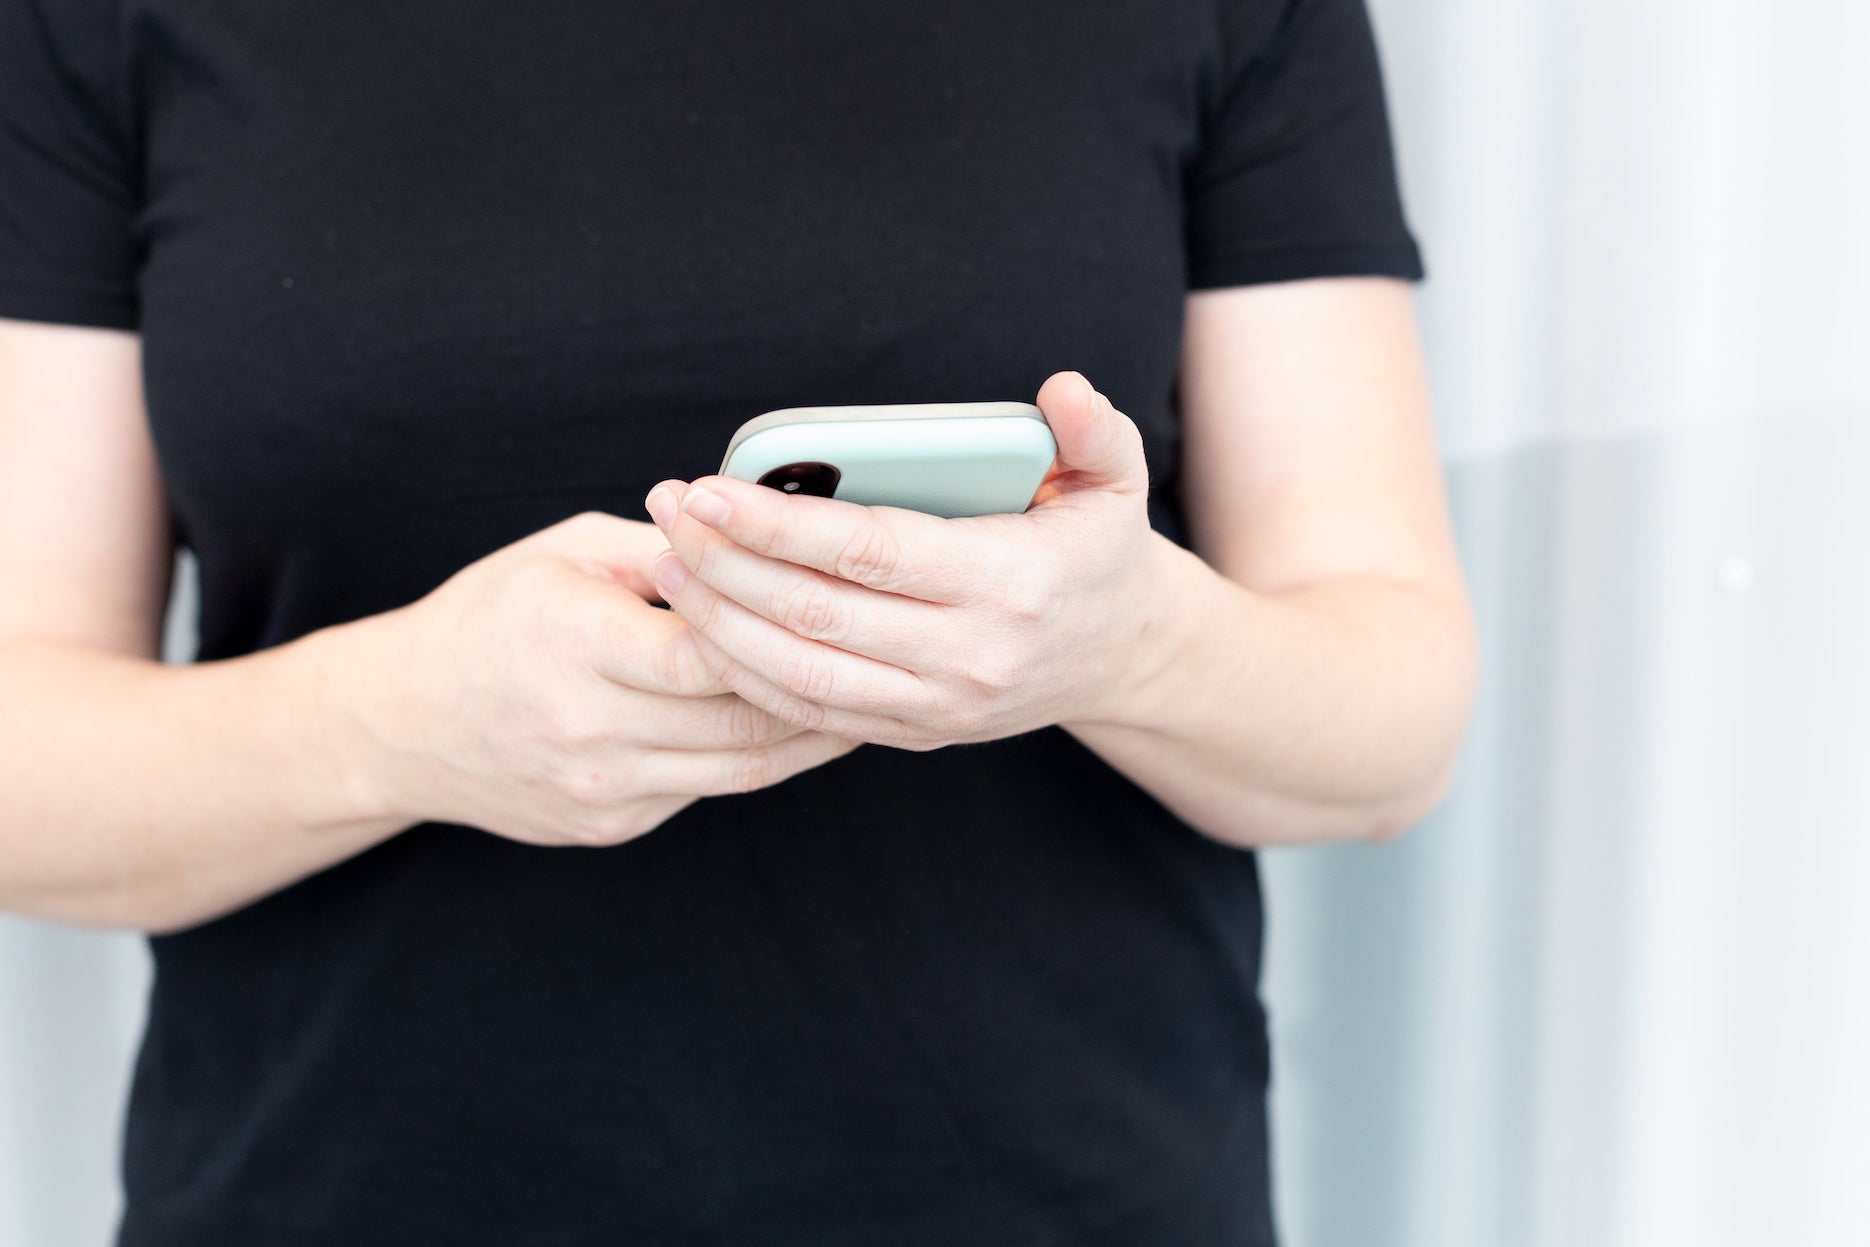 A person wearing a black shirt holds their phone